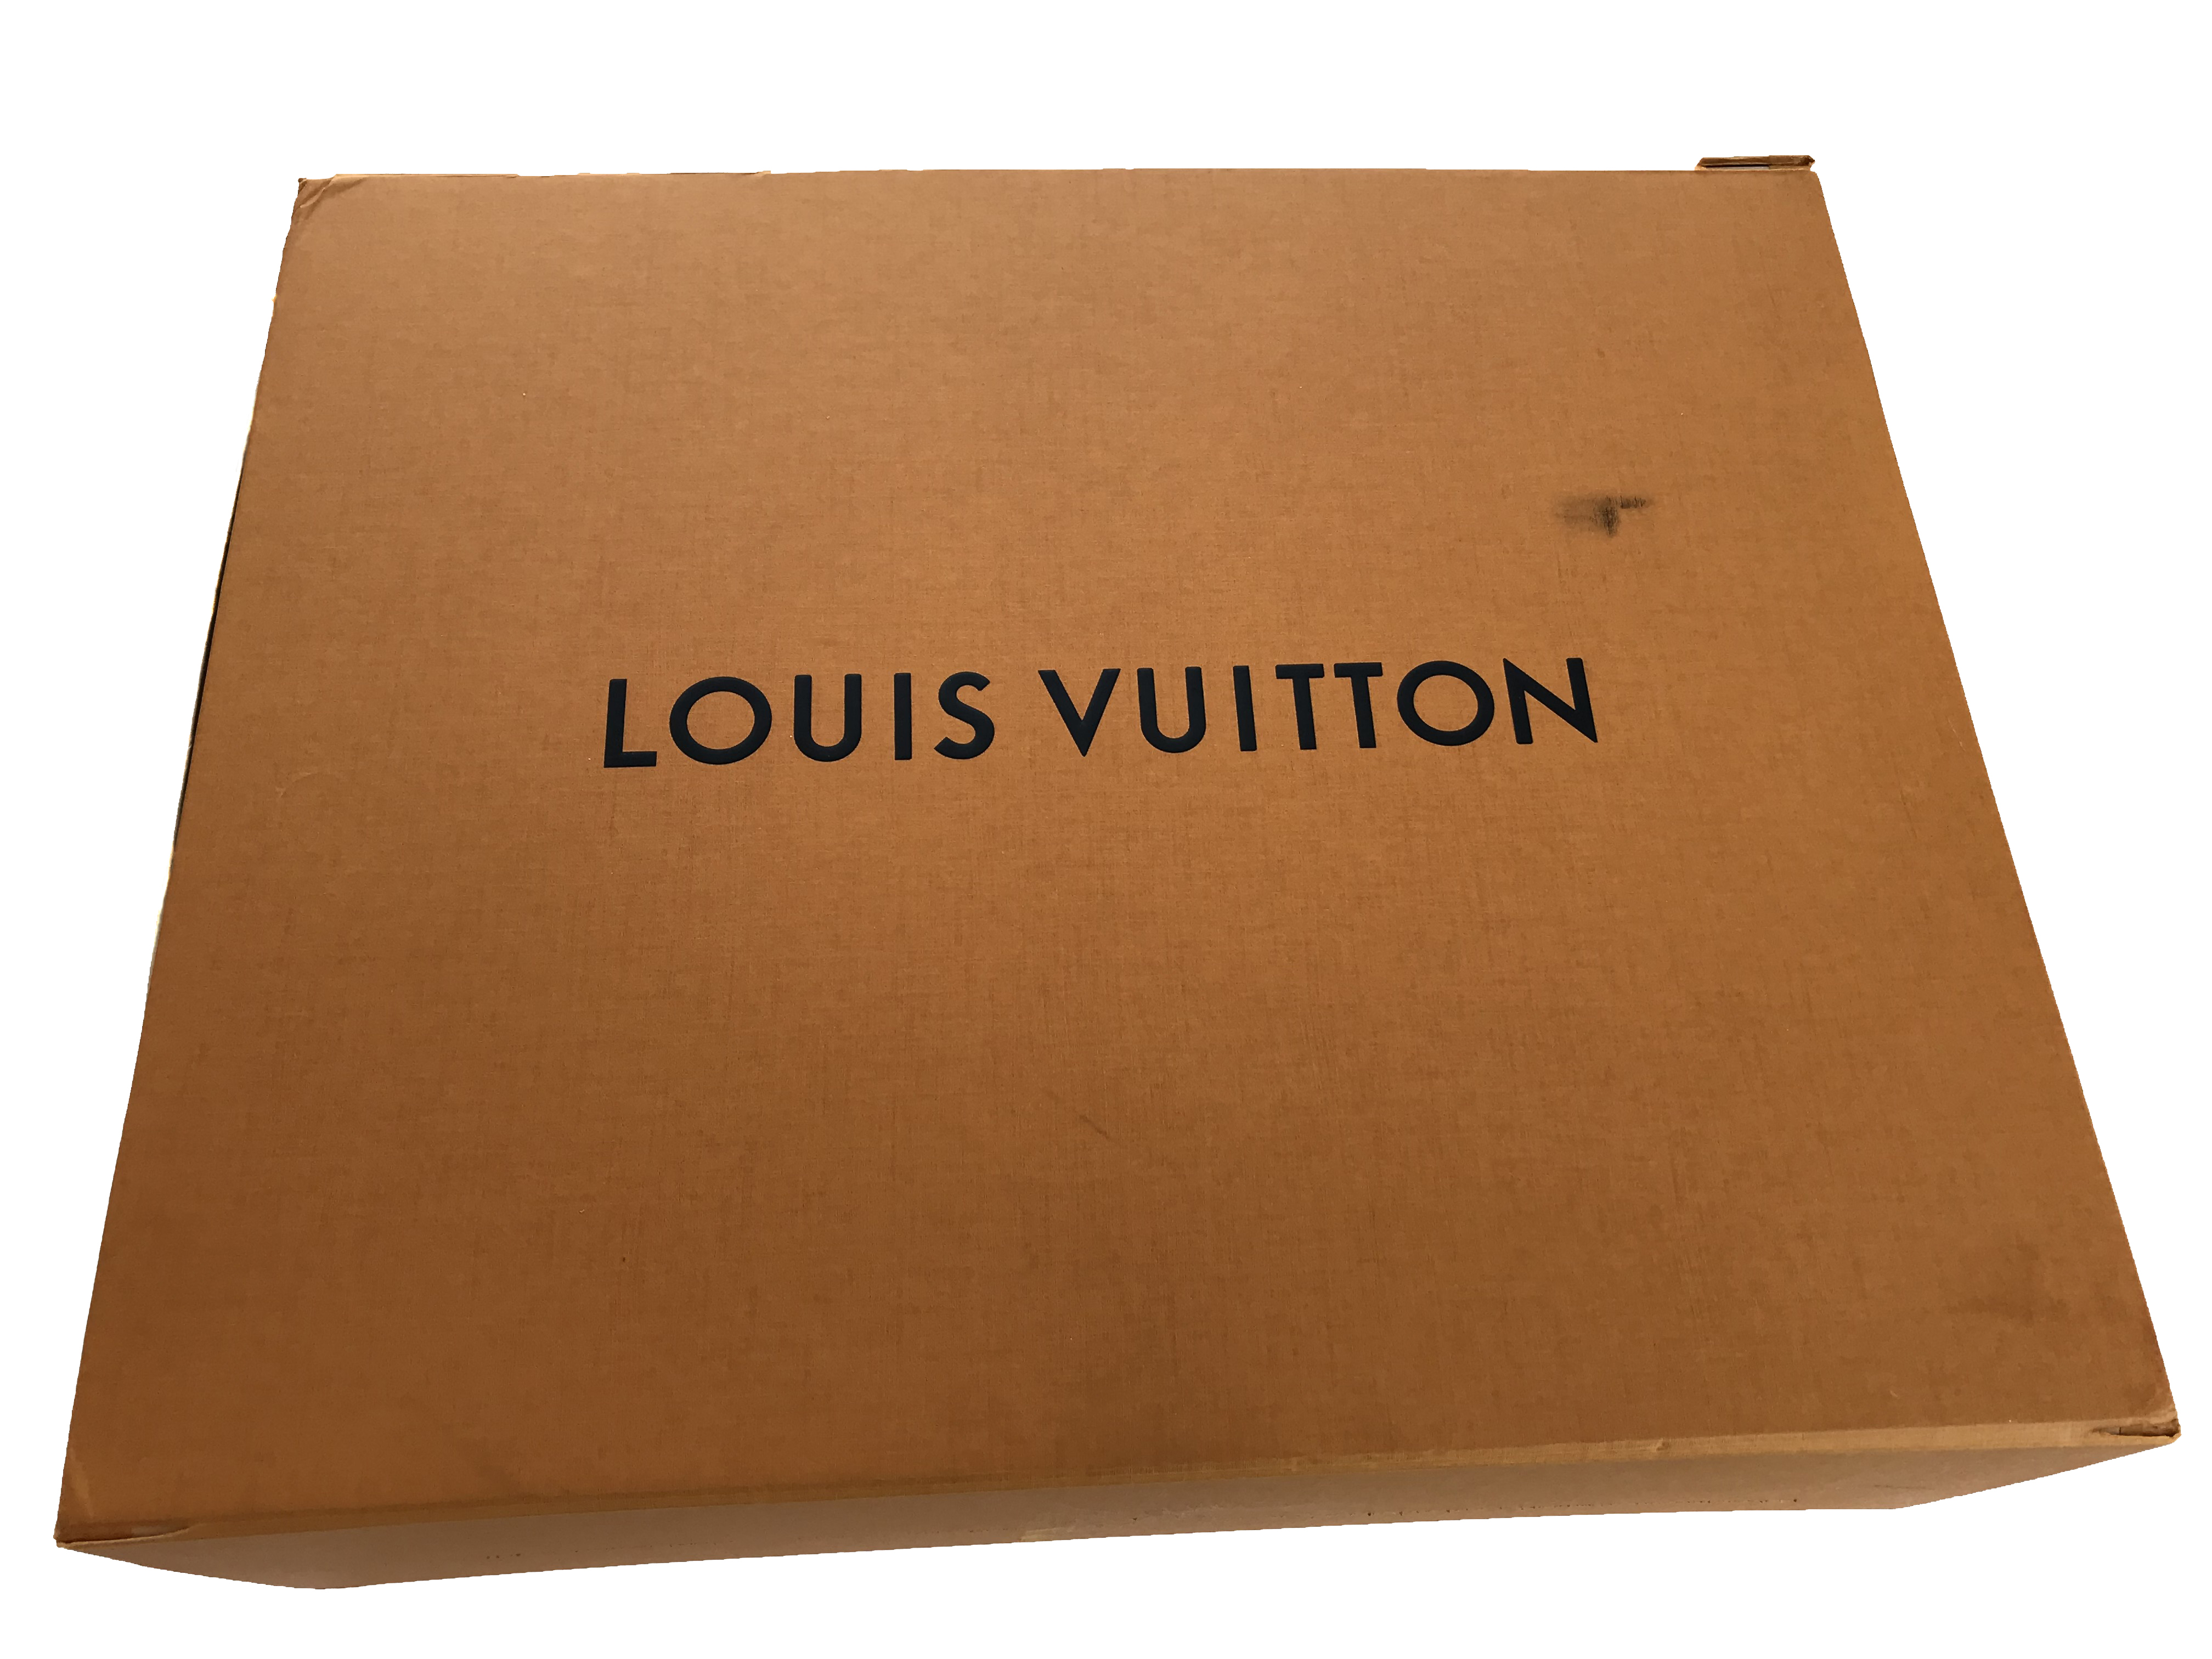 Louis Vuitton Apollo Backpack Limited Edition Reflect, 43% OFF